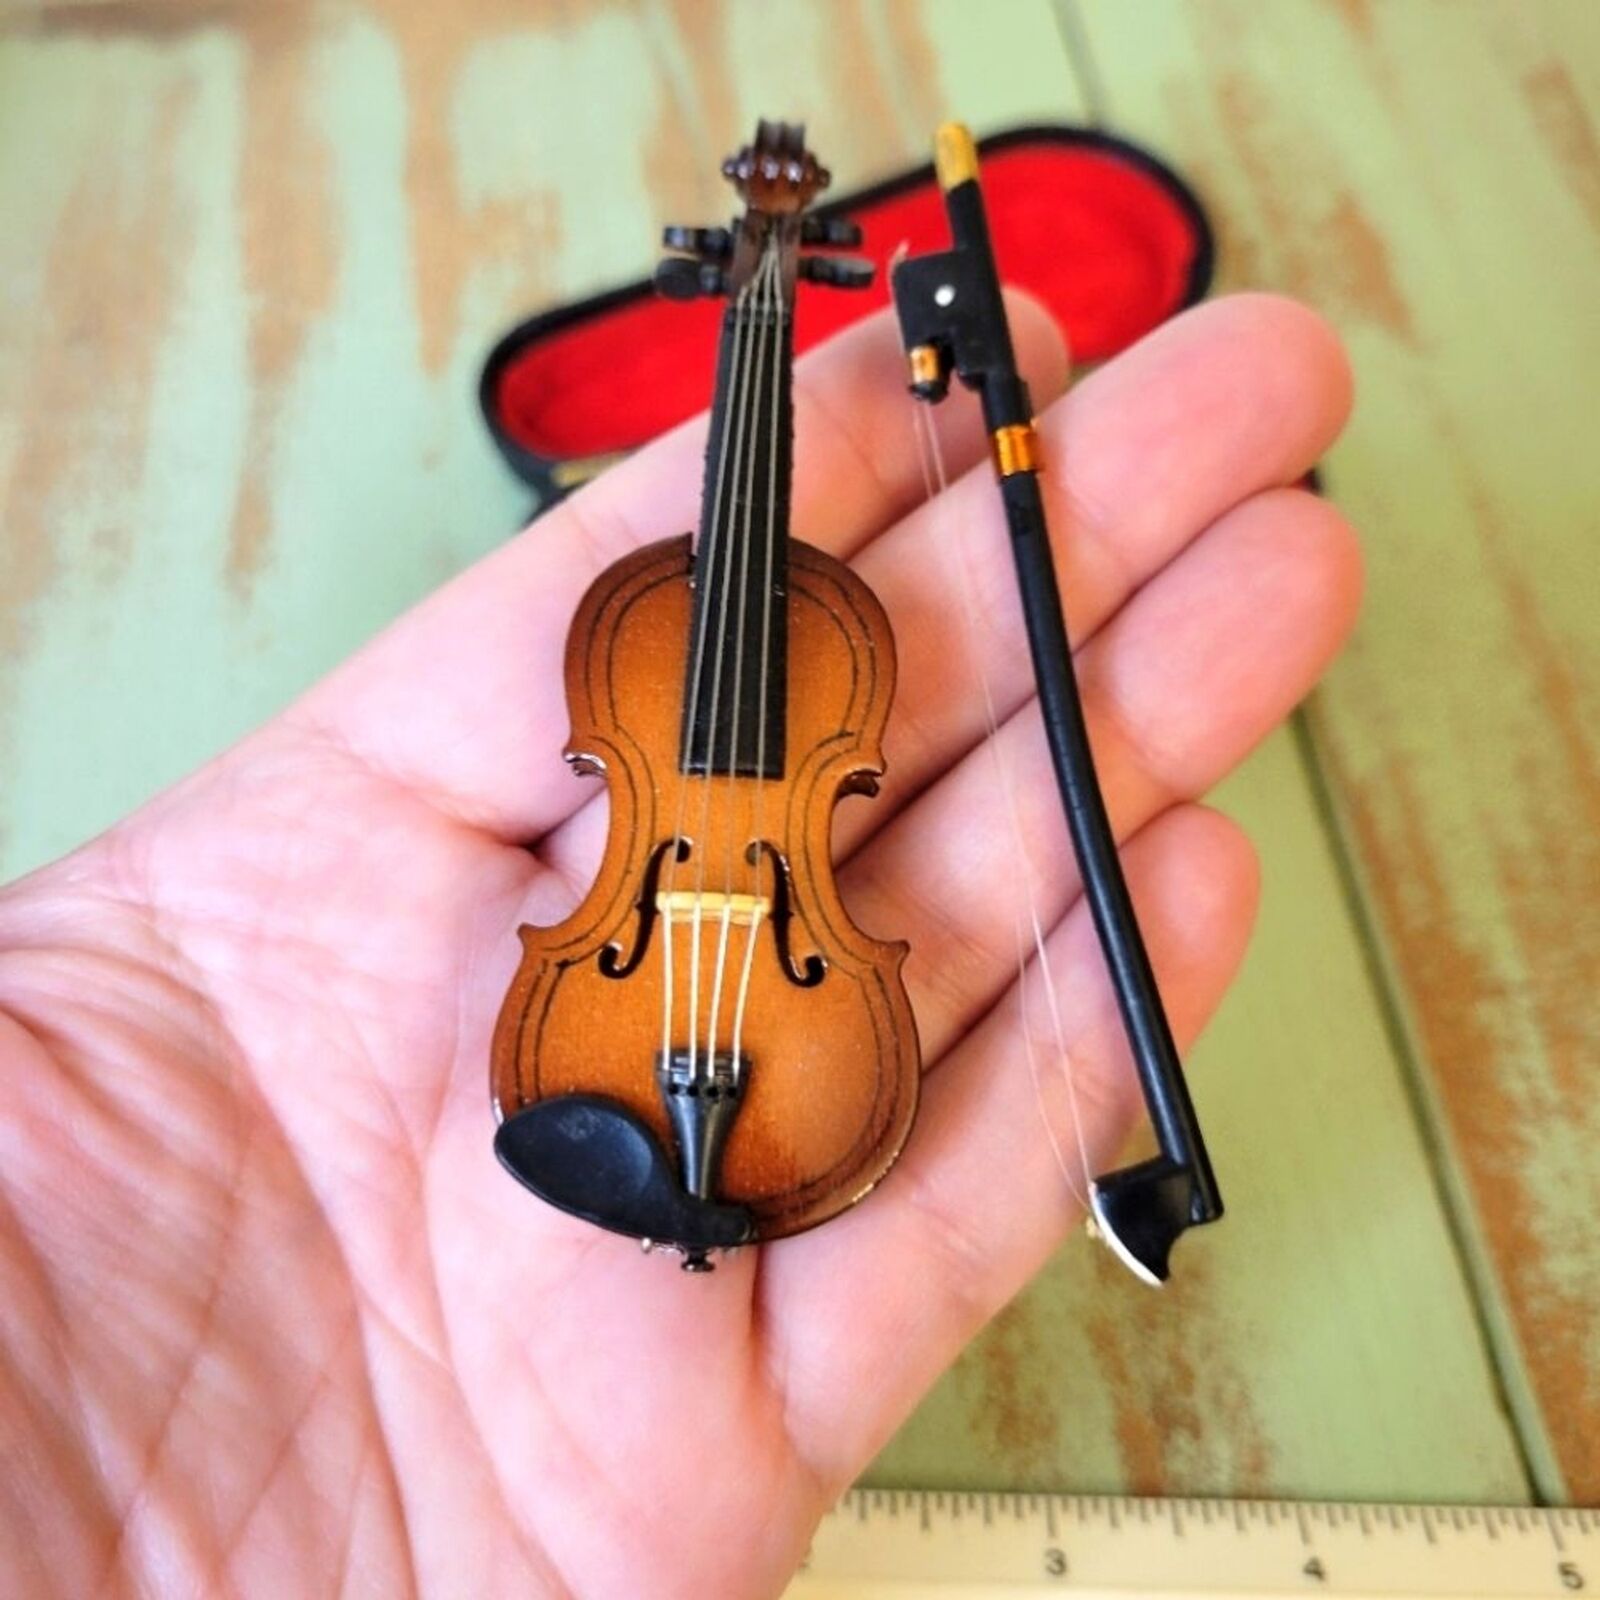 Exquisite Miniature 1:12 Scale Violin with Bow & Case Dollhouse Figurine